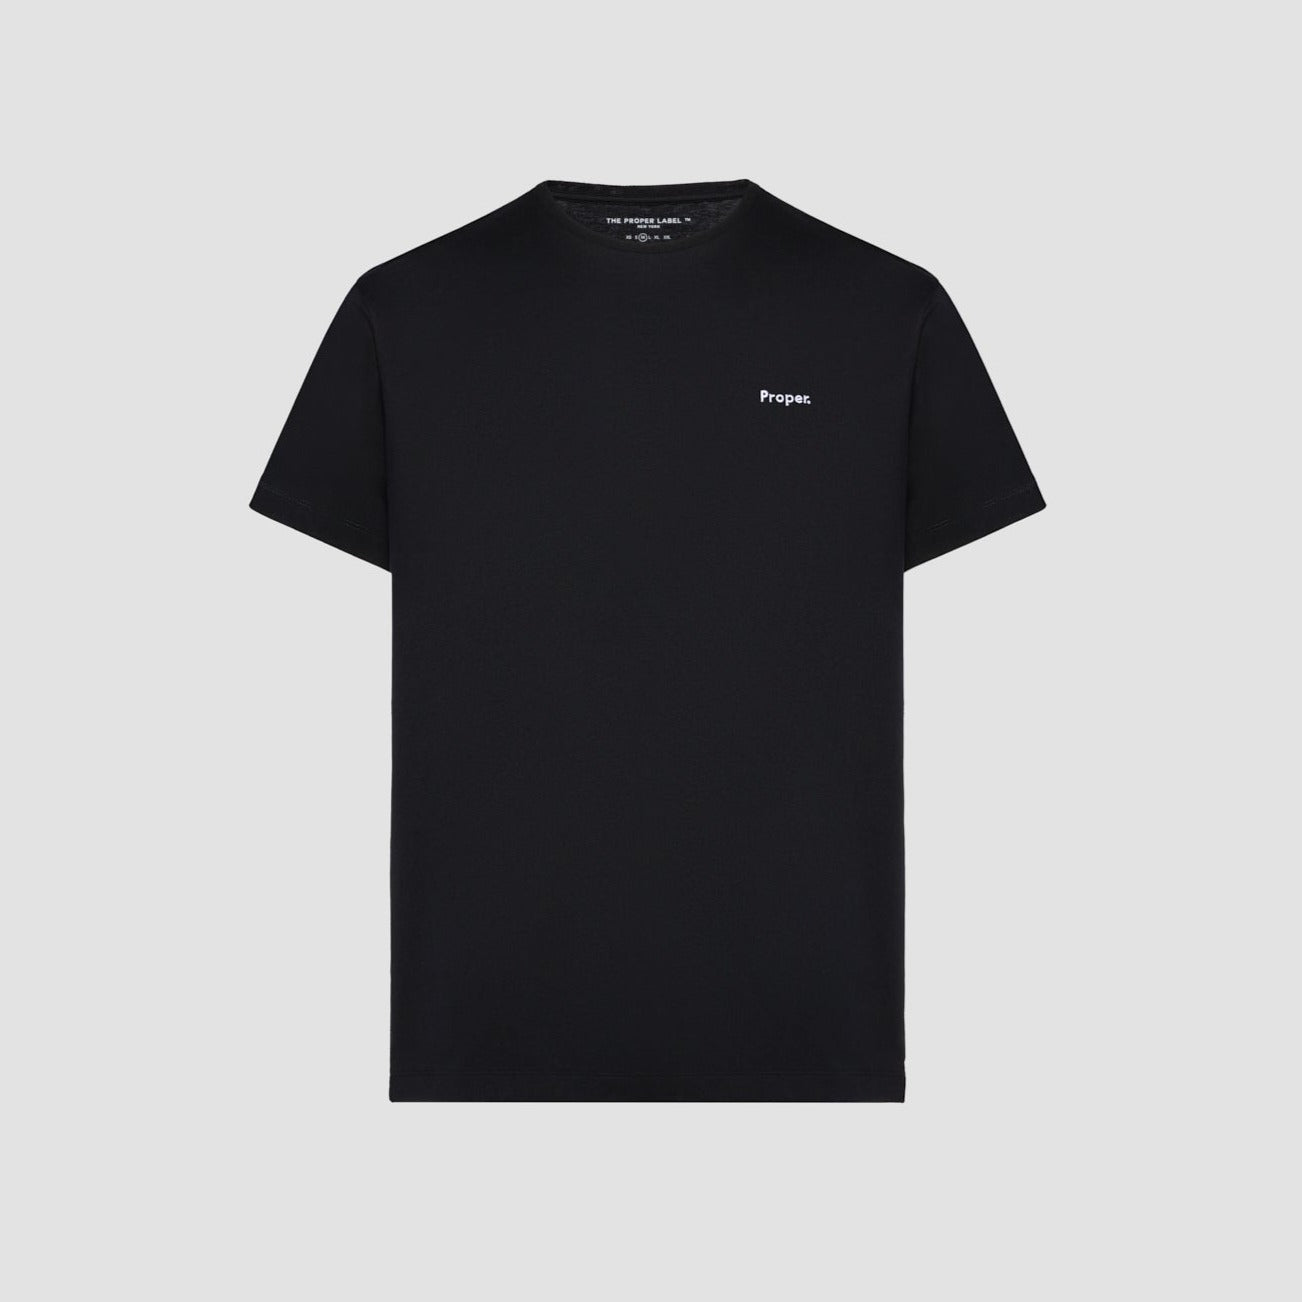 BOXY Fit Black T-Shirt Essential - 100% Organic Cotton Made In